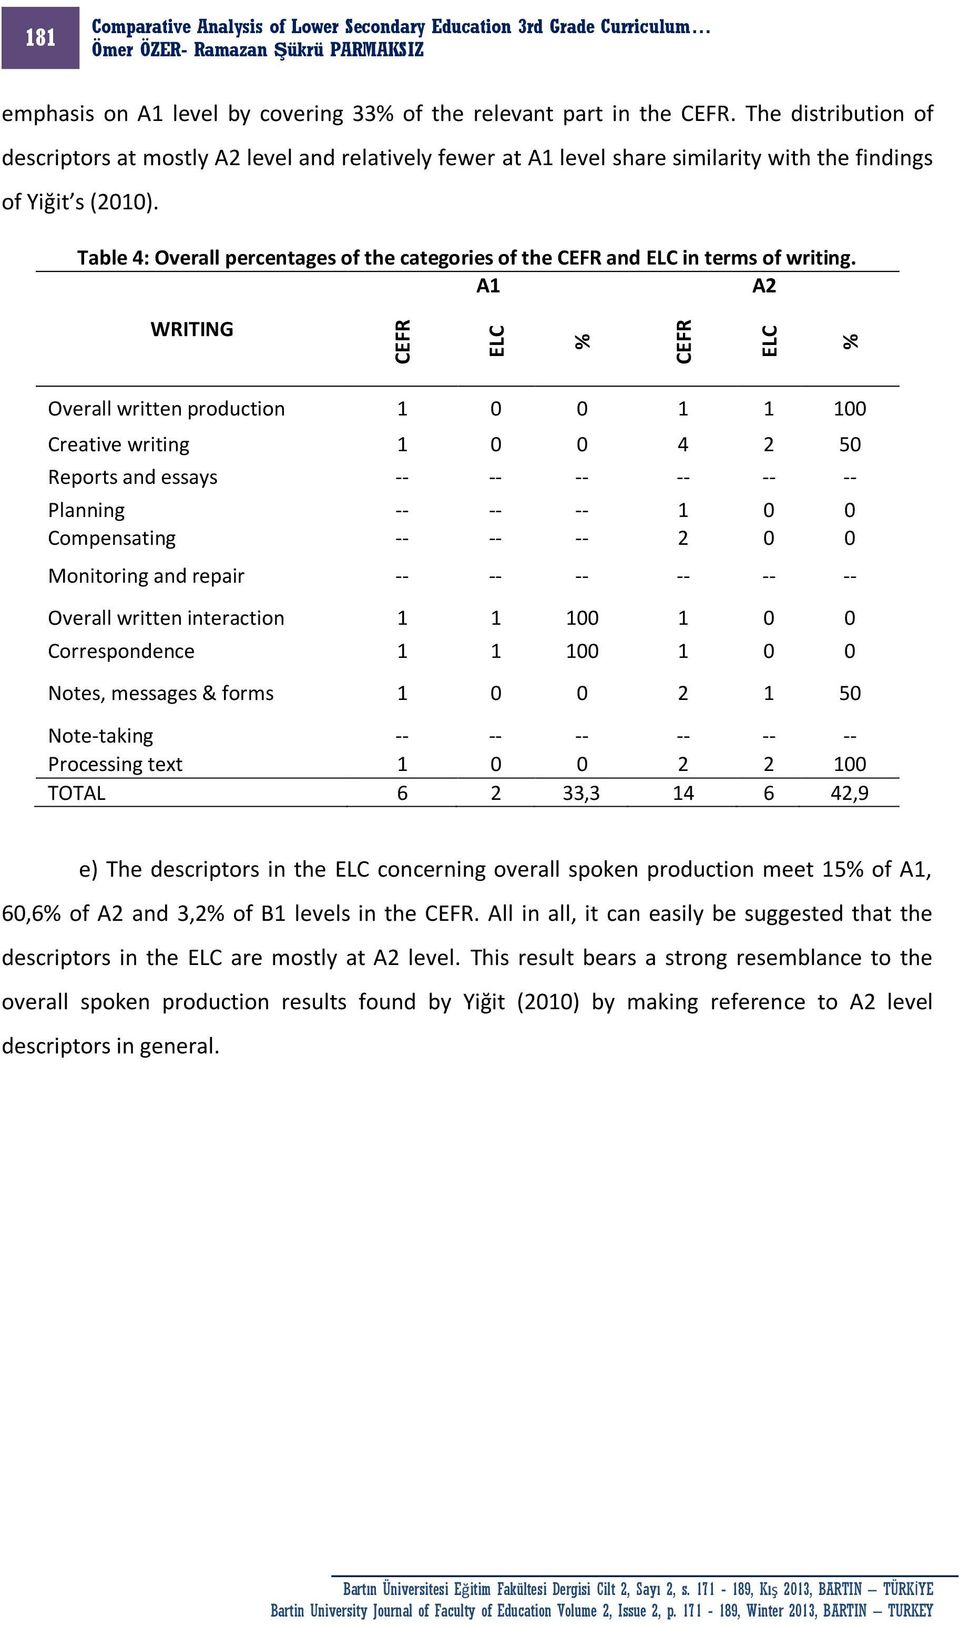 Table 4: Overall percentages of the categories of the CEFR and ELC in terms of writing.